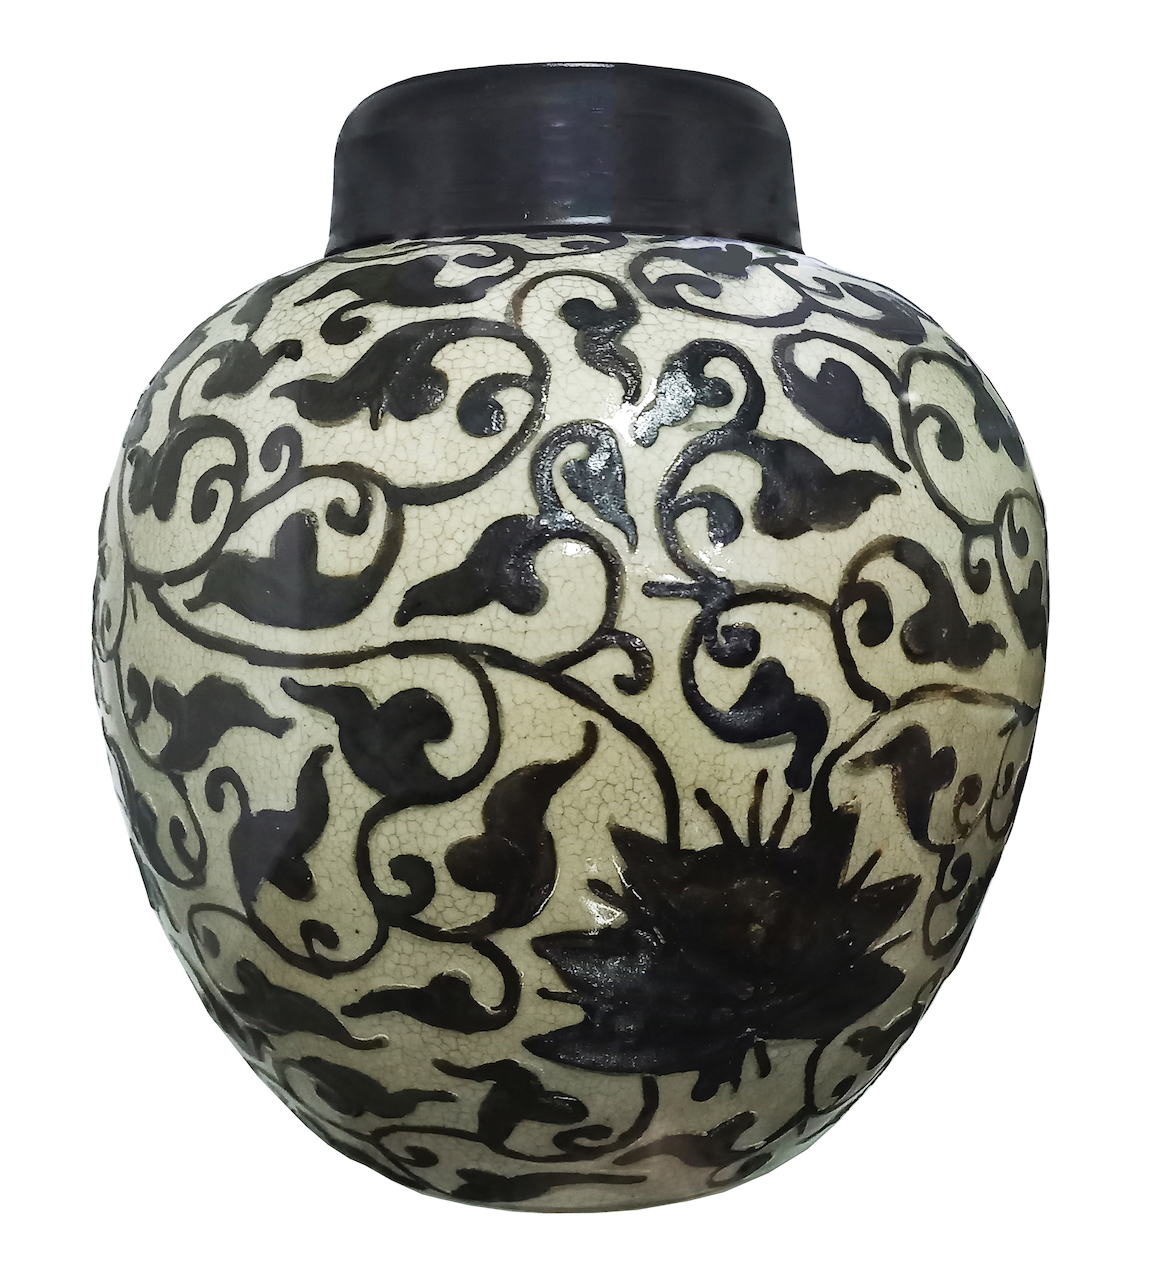 A 19th century Qing Chinese crackle glazed ginger jar with applied brown decoration